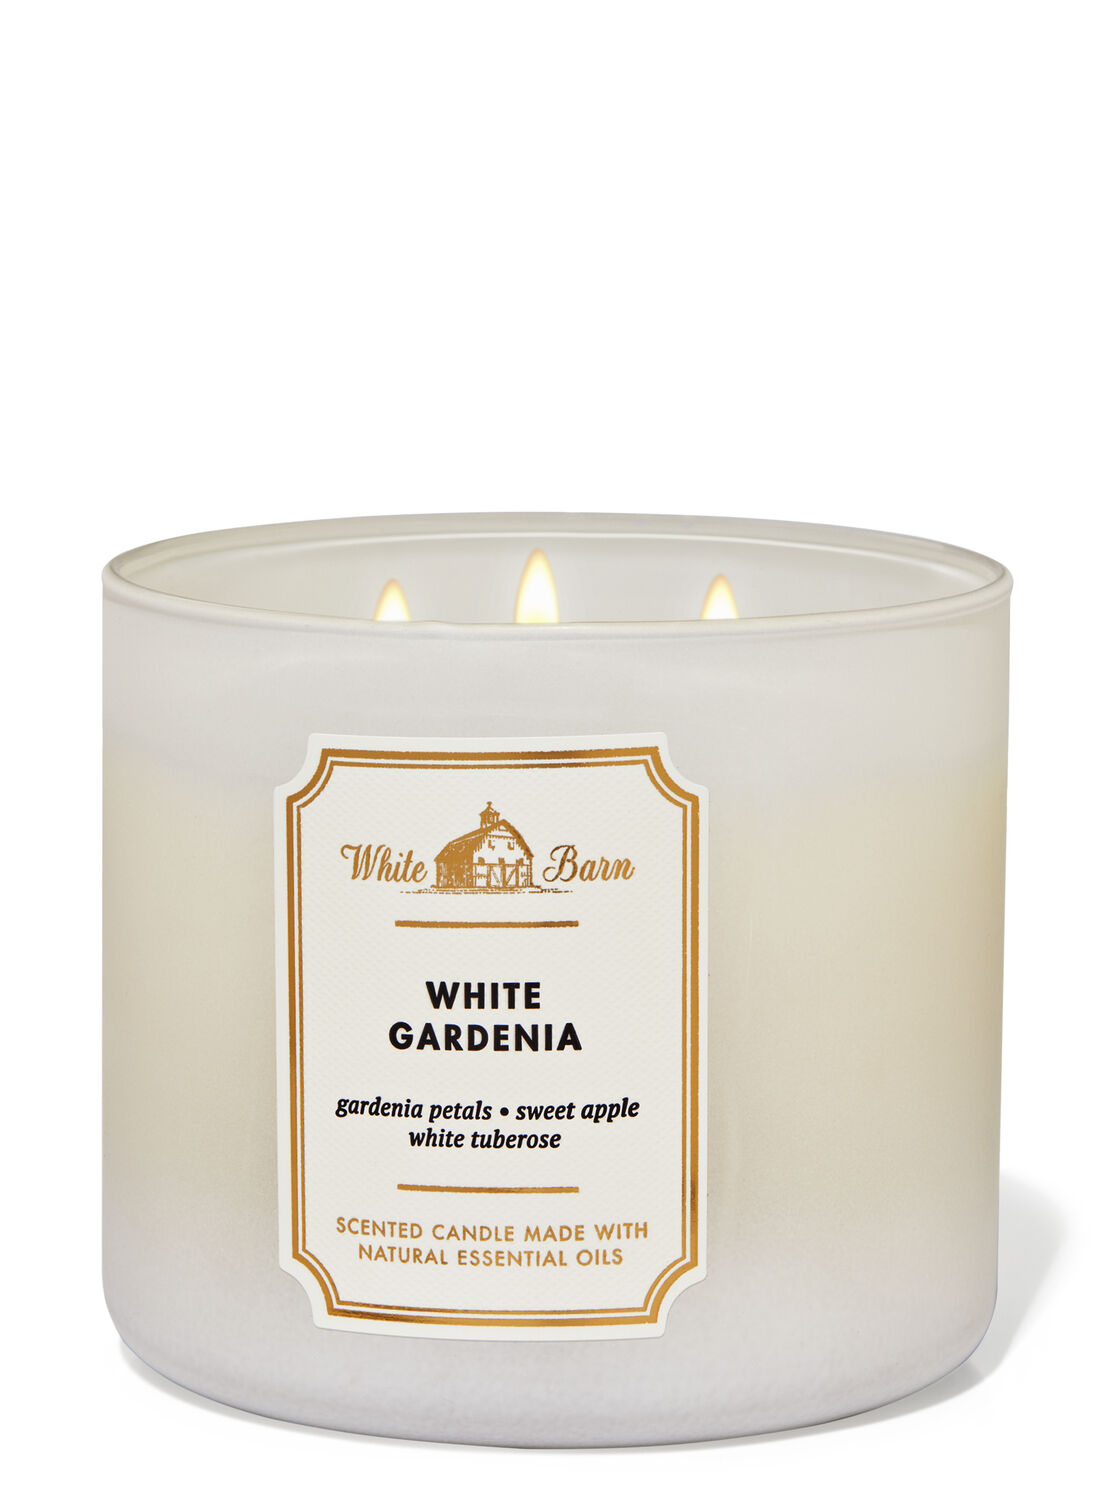 1 Bath & Body Works WHITE GARDENIA Large 3-Wick Scented Candle 14.5 oz 